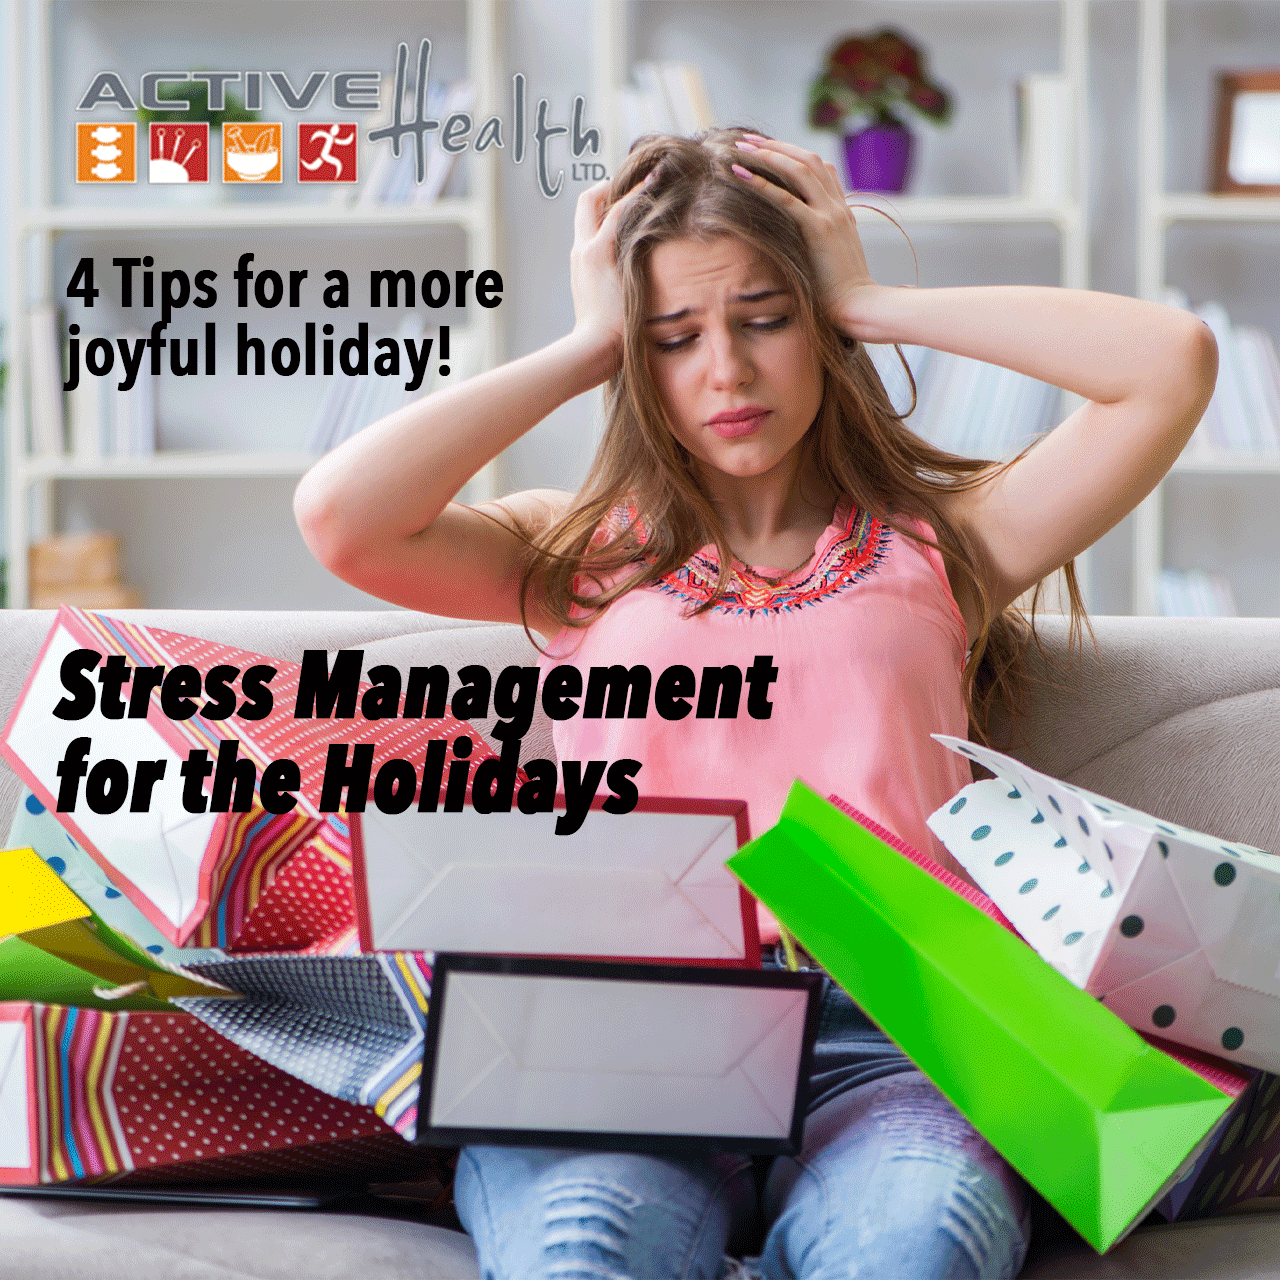 x Stress Management Tips for the Holidays